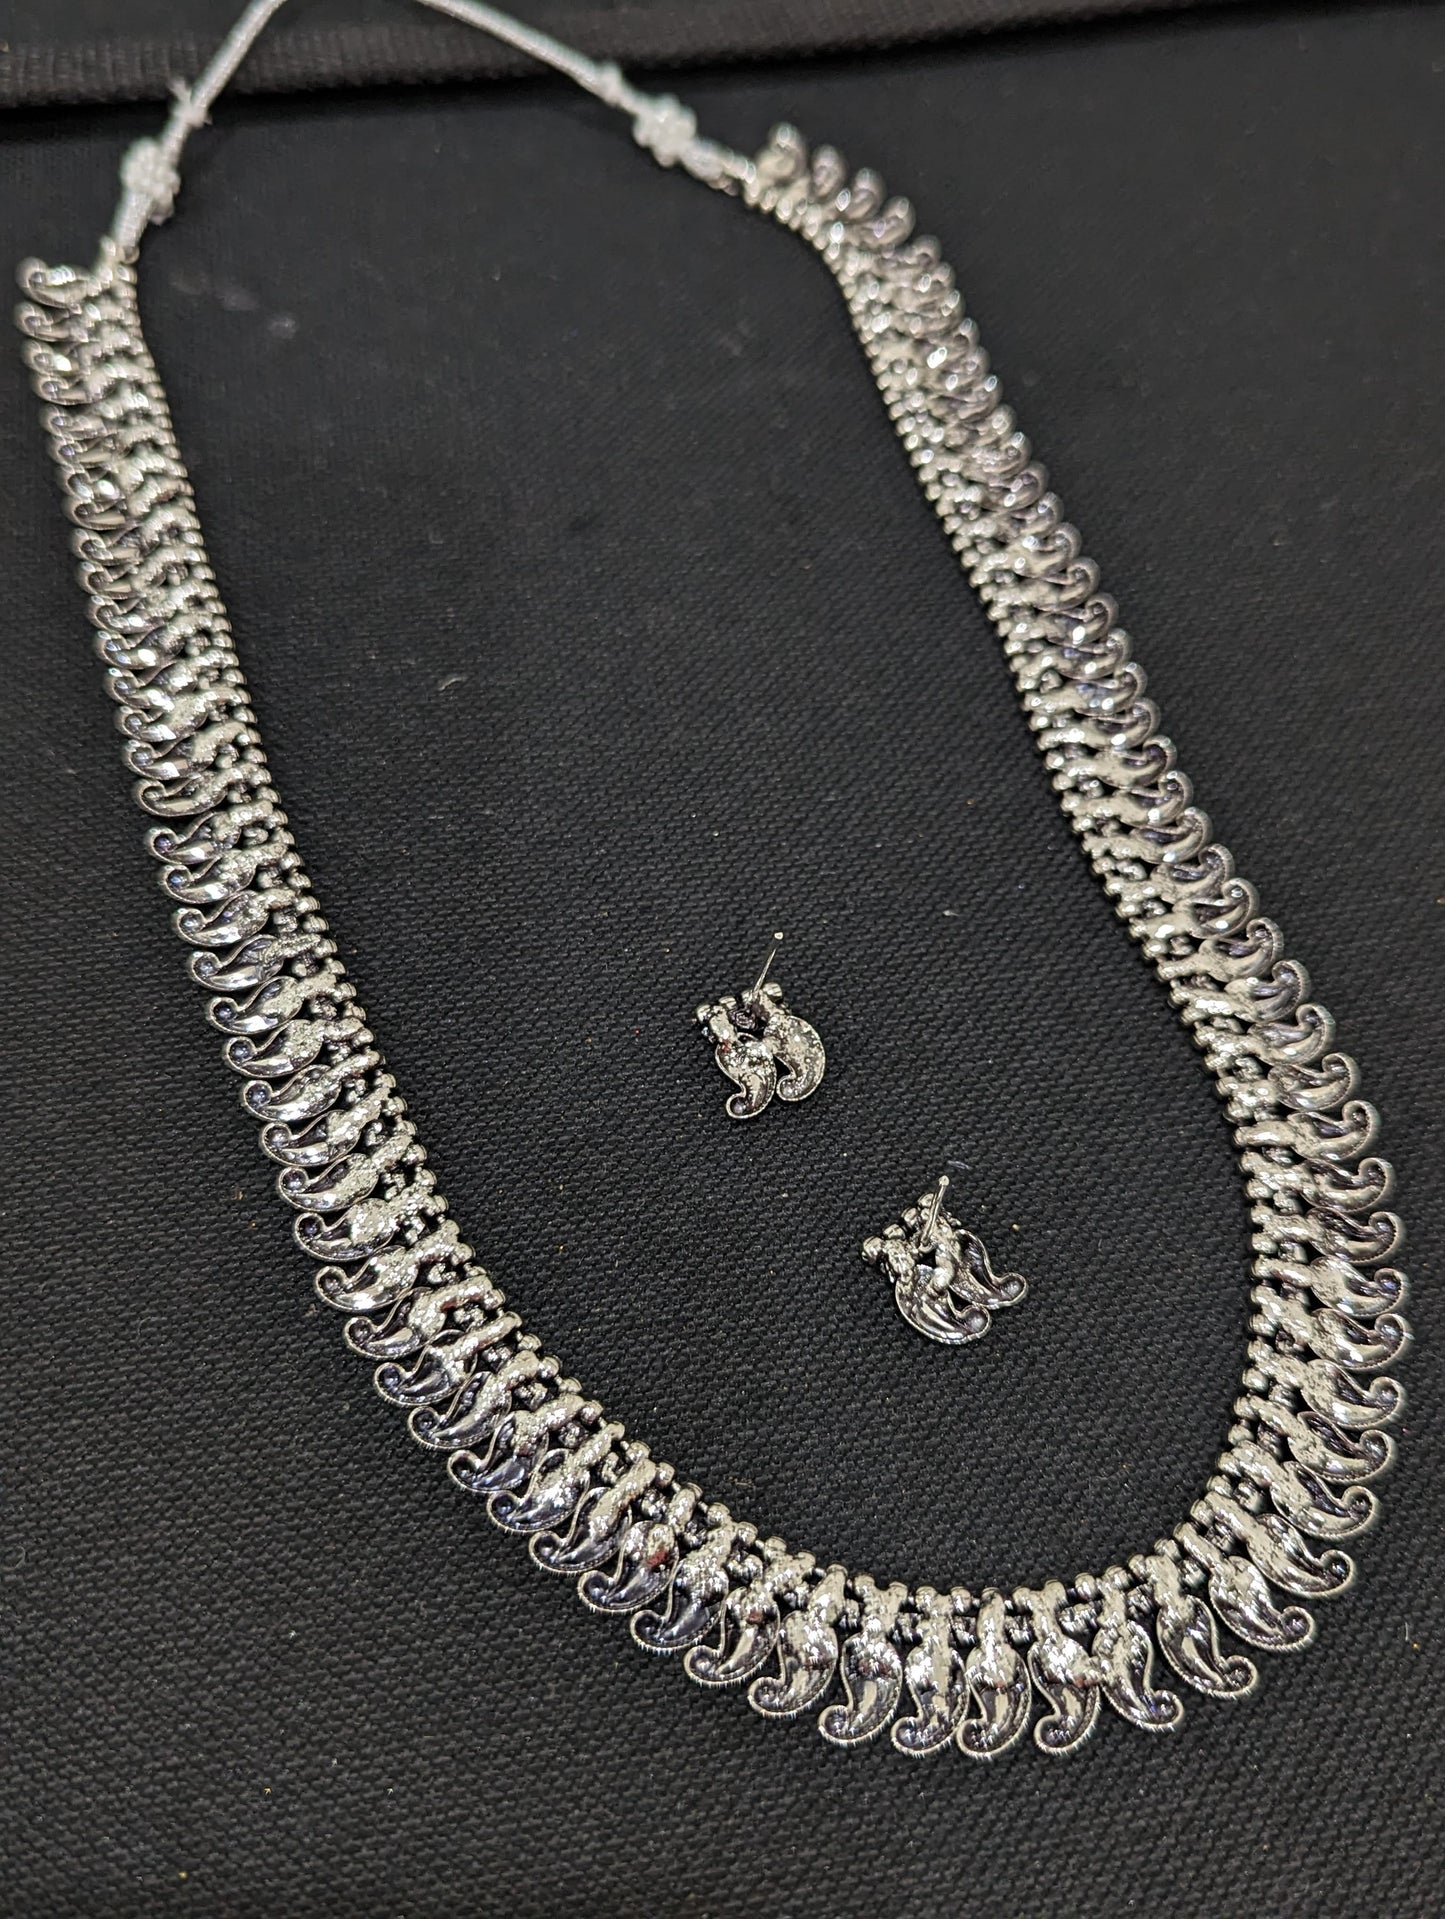 Oxidized silver Mango design necklace and earrings set